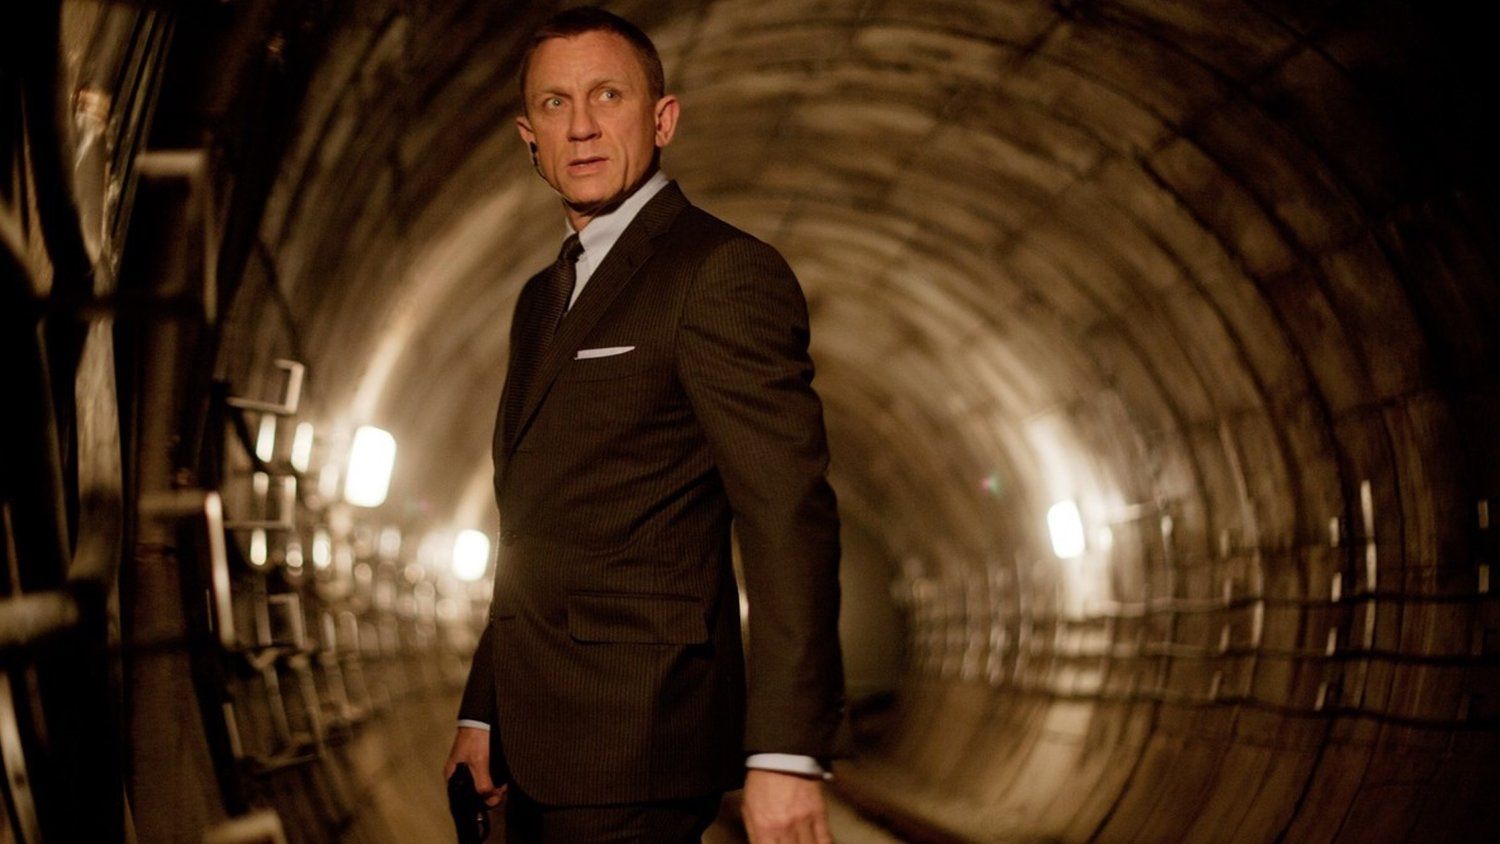 An Explosion On The Sets Of Daniel Craig's Bond 25 Leaves On Person Injured 